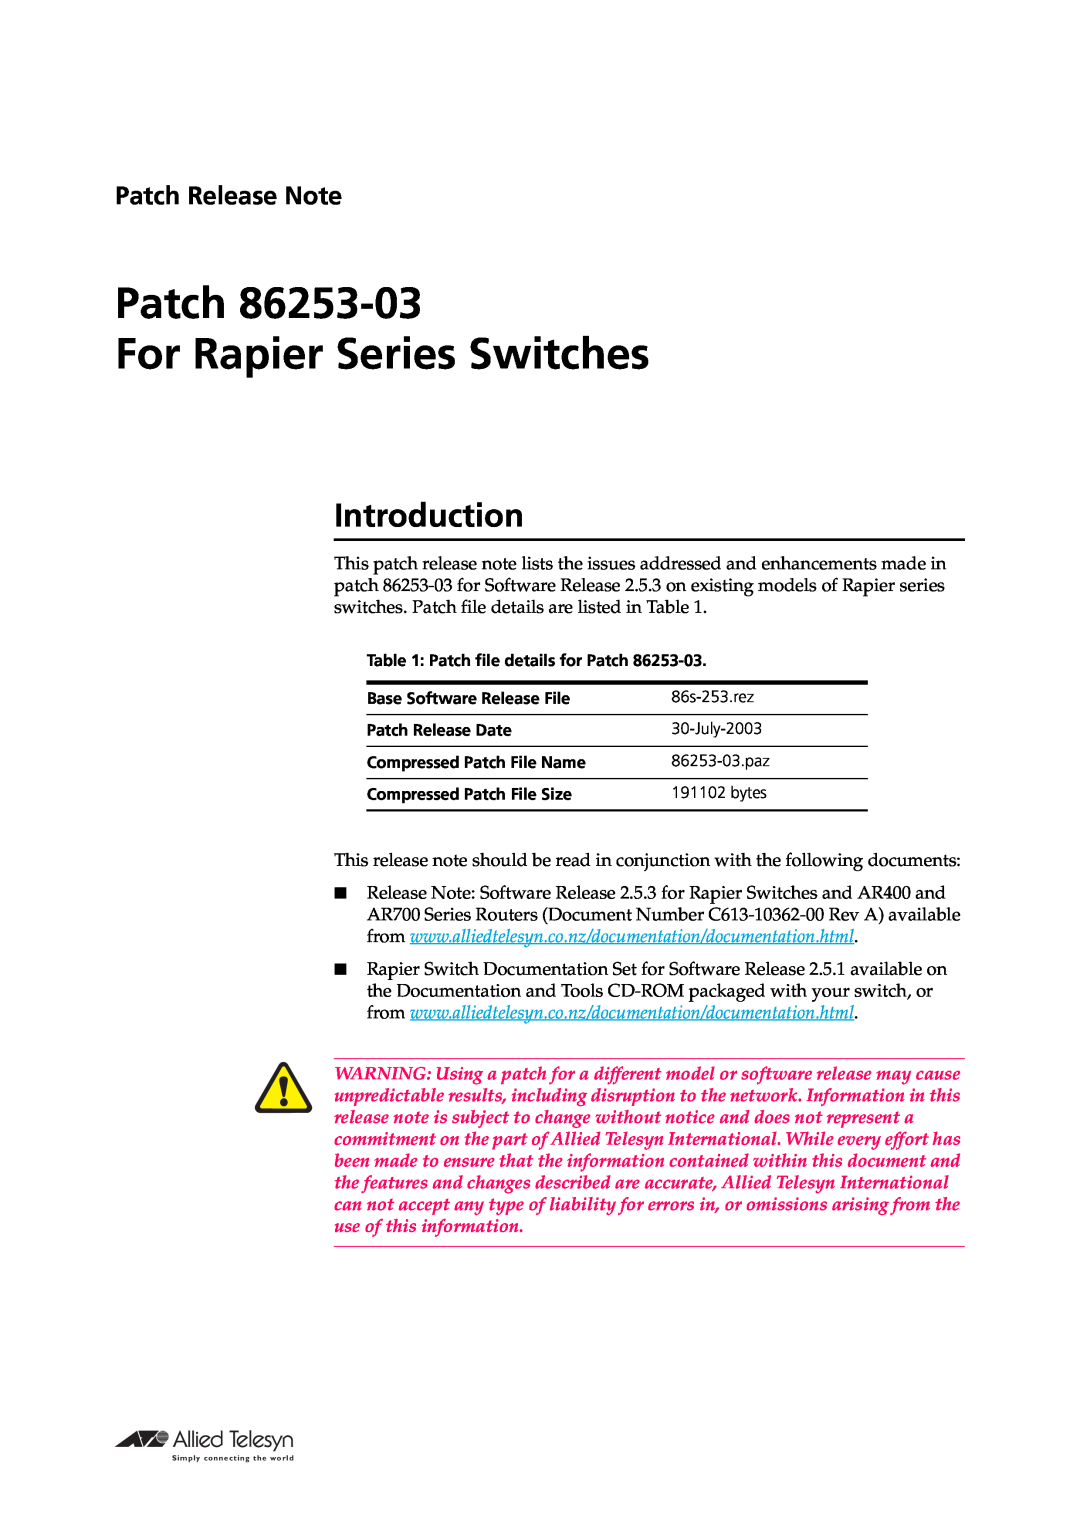 Allied Telesis manual Introduction, Patch For Rapier Series Switches, Patch Release Note 